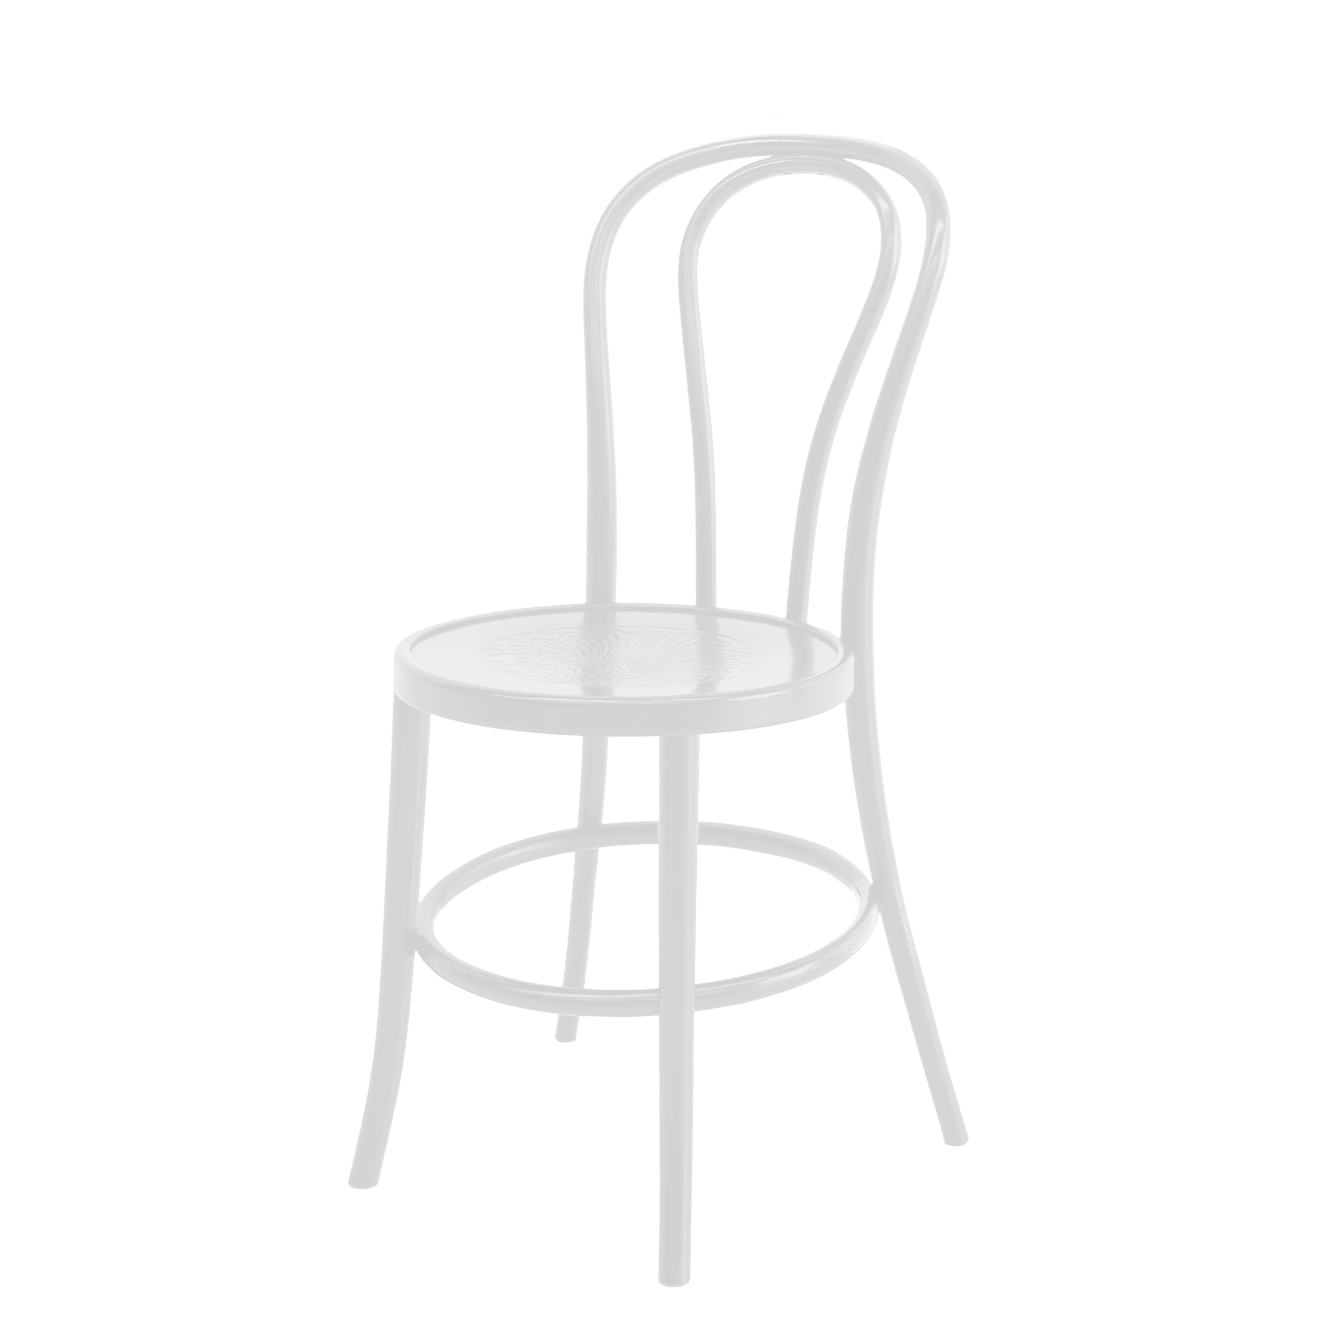 1_Whitebentwoodchair.png